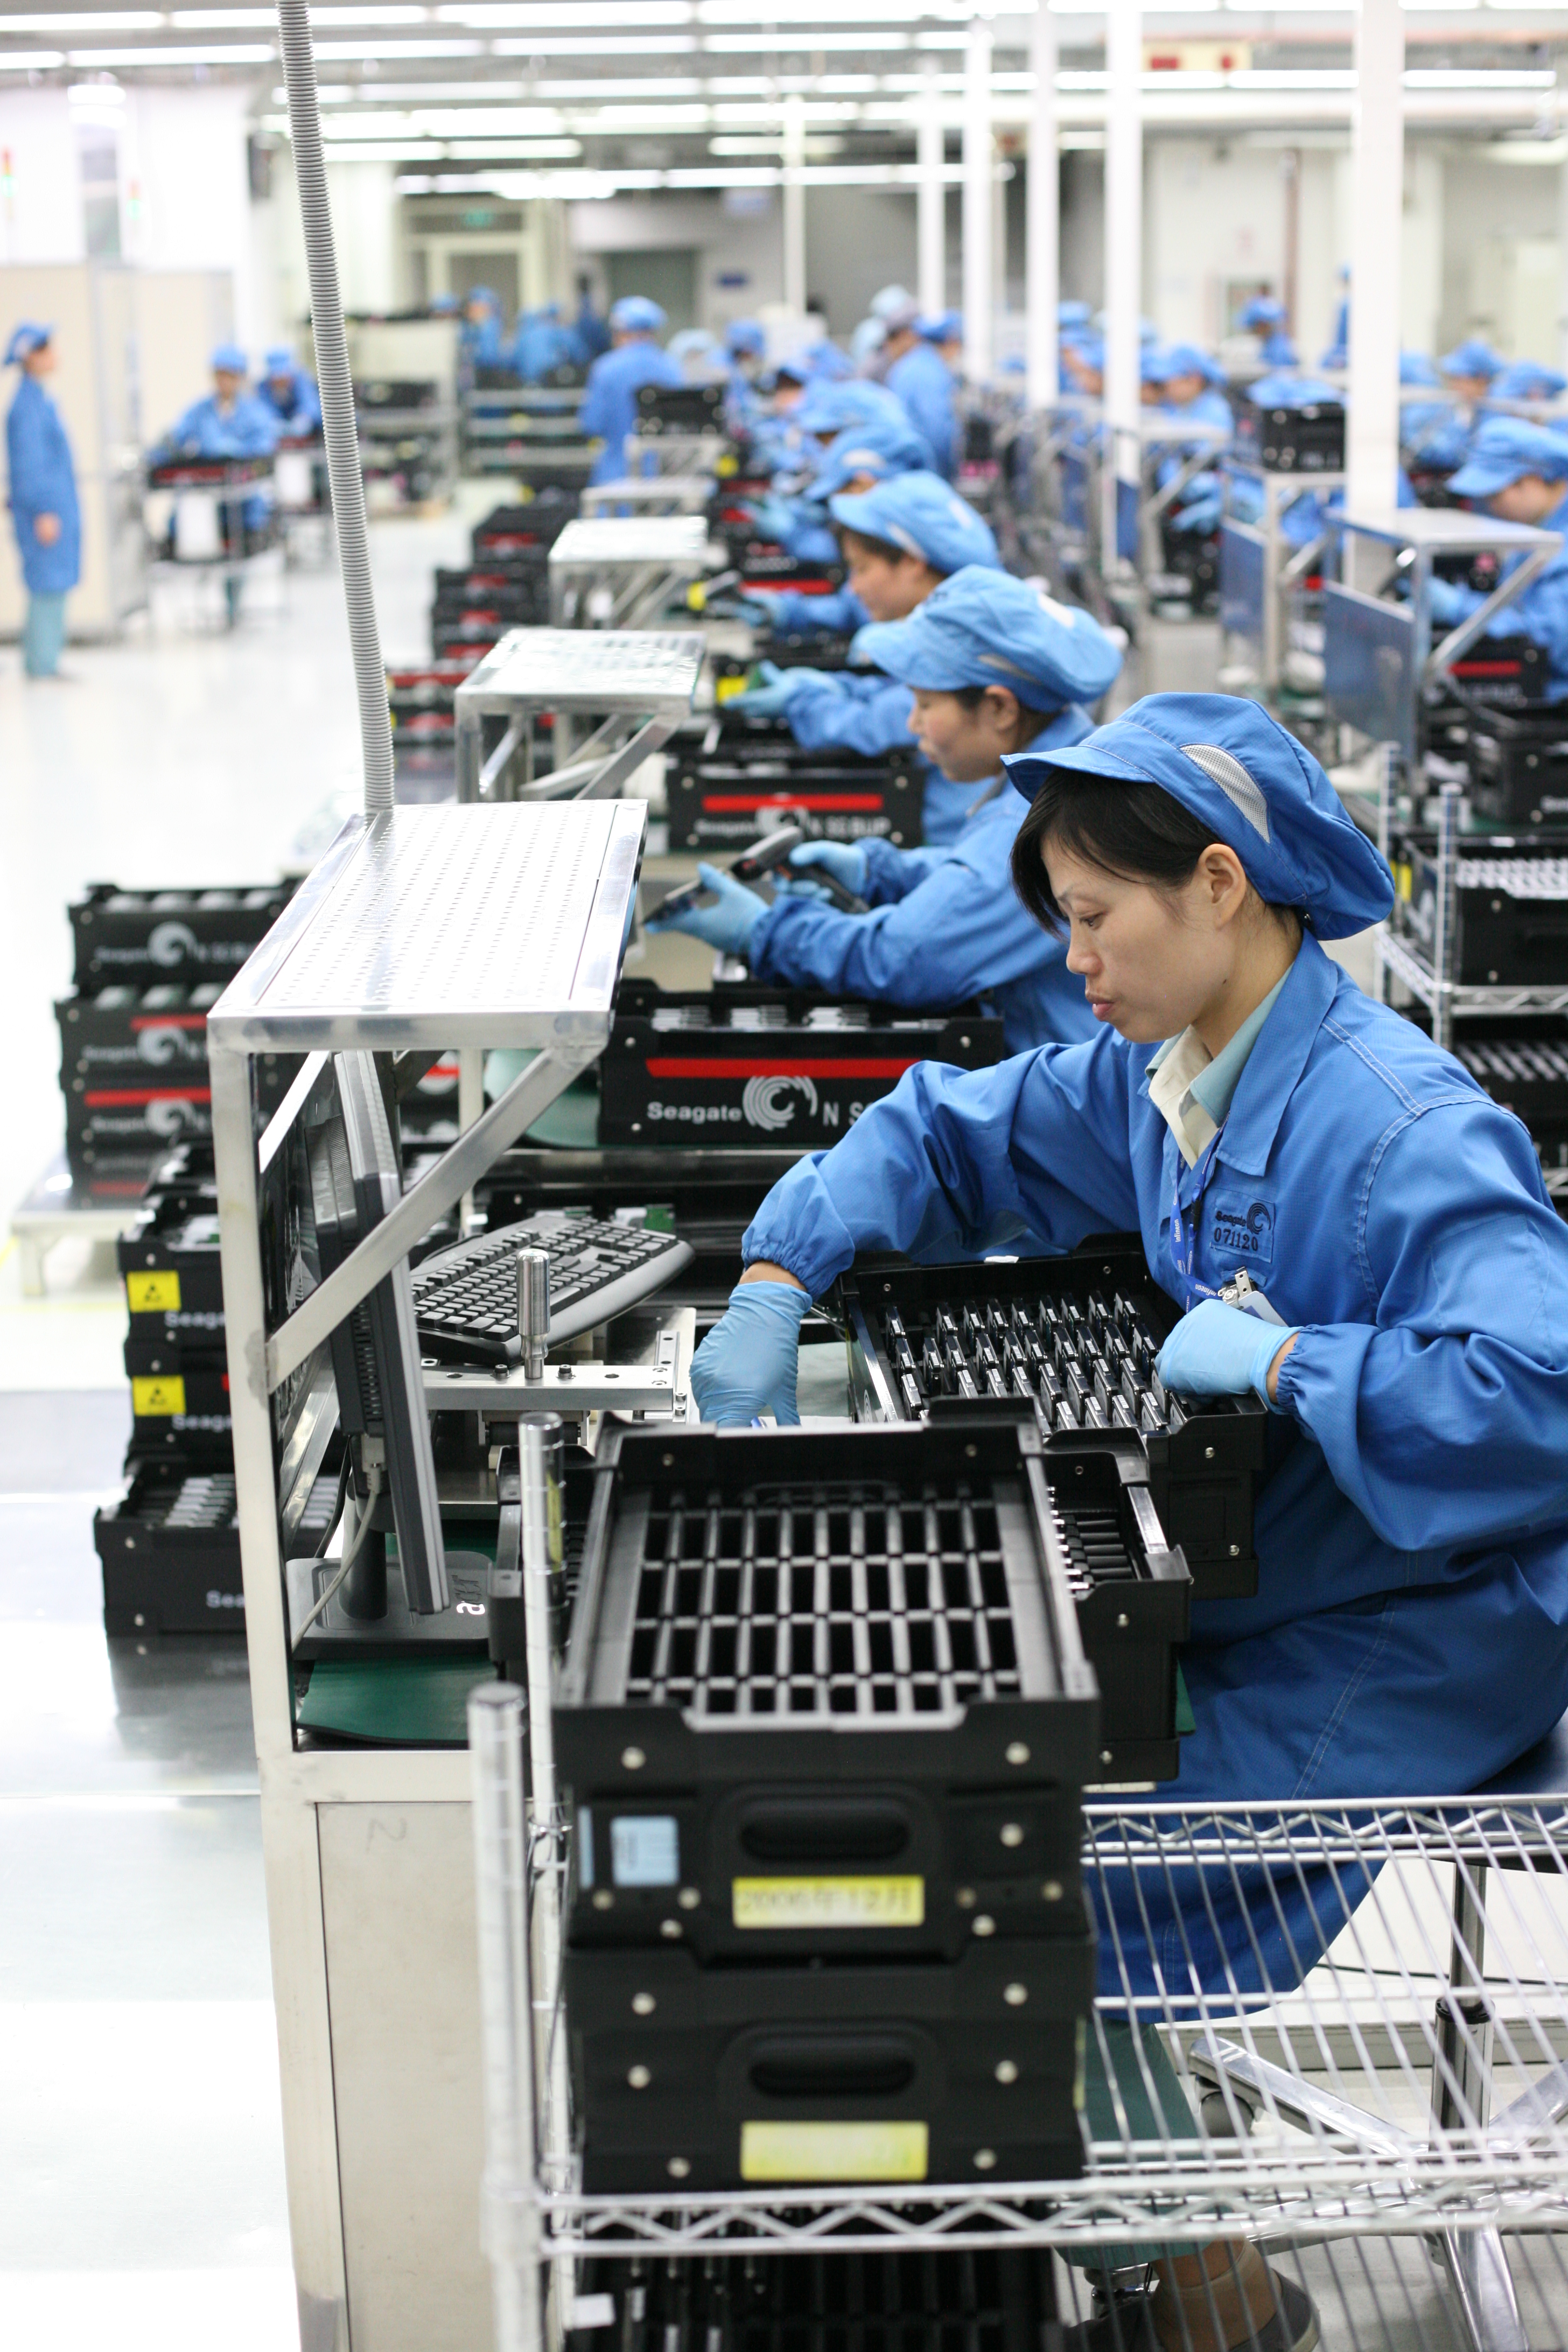 Workers in 2008 perform quality control testing on computer drives; Seagate Wuxi China Factory Tour. (Robert Scoble via Wikimedia)